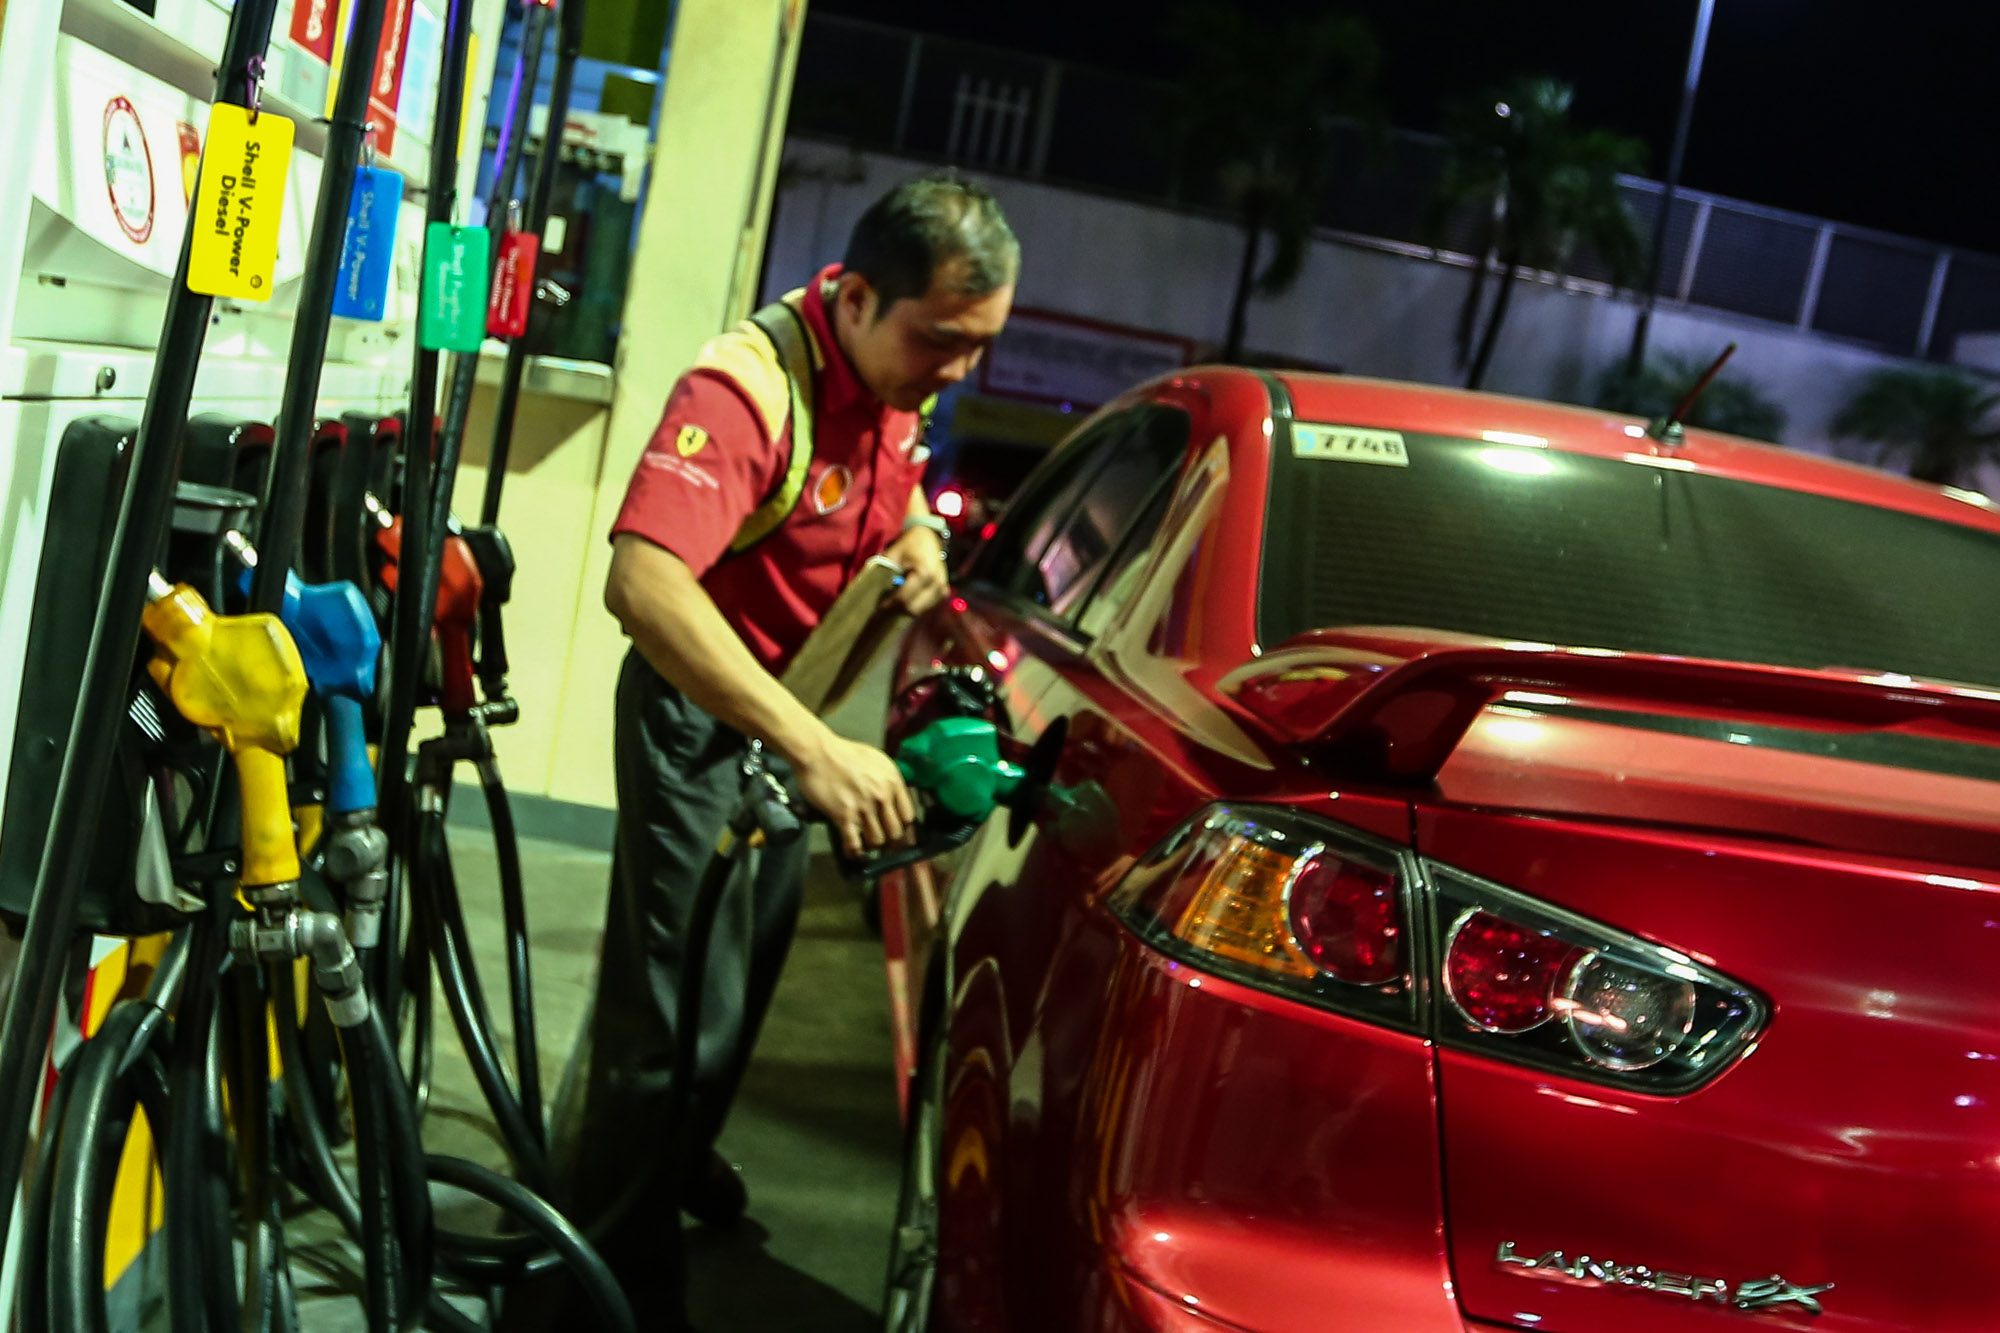 Fuel prices to go up on May 21